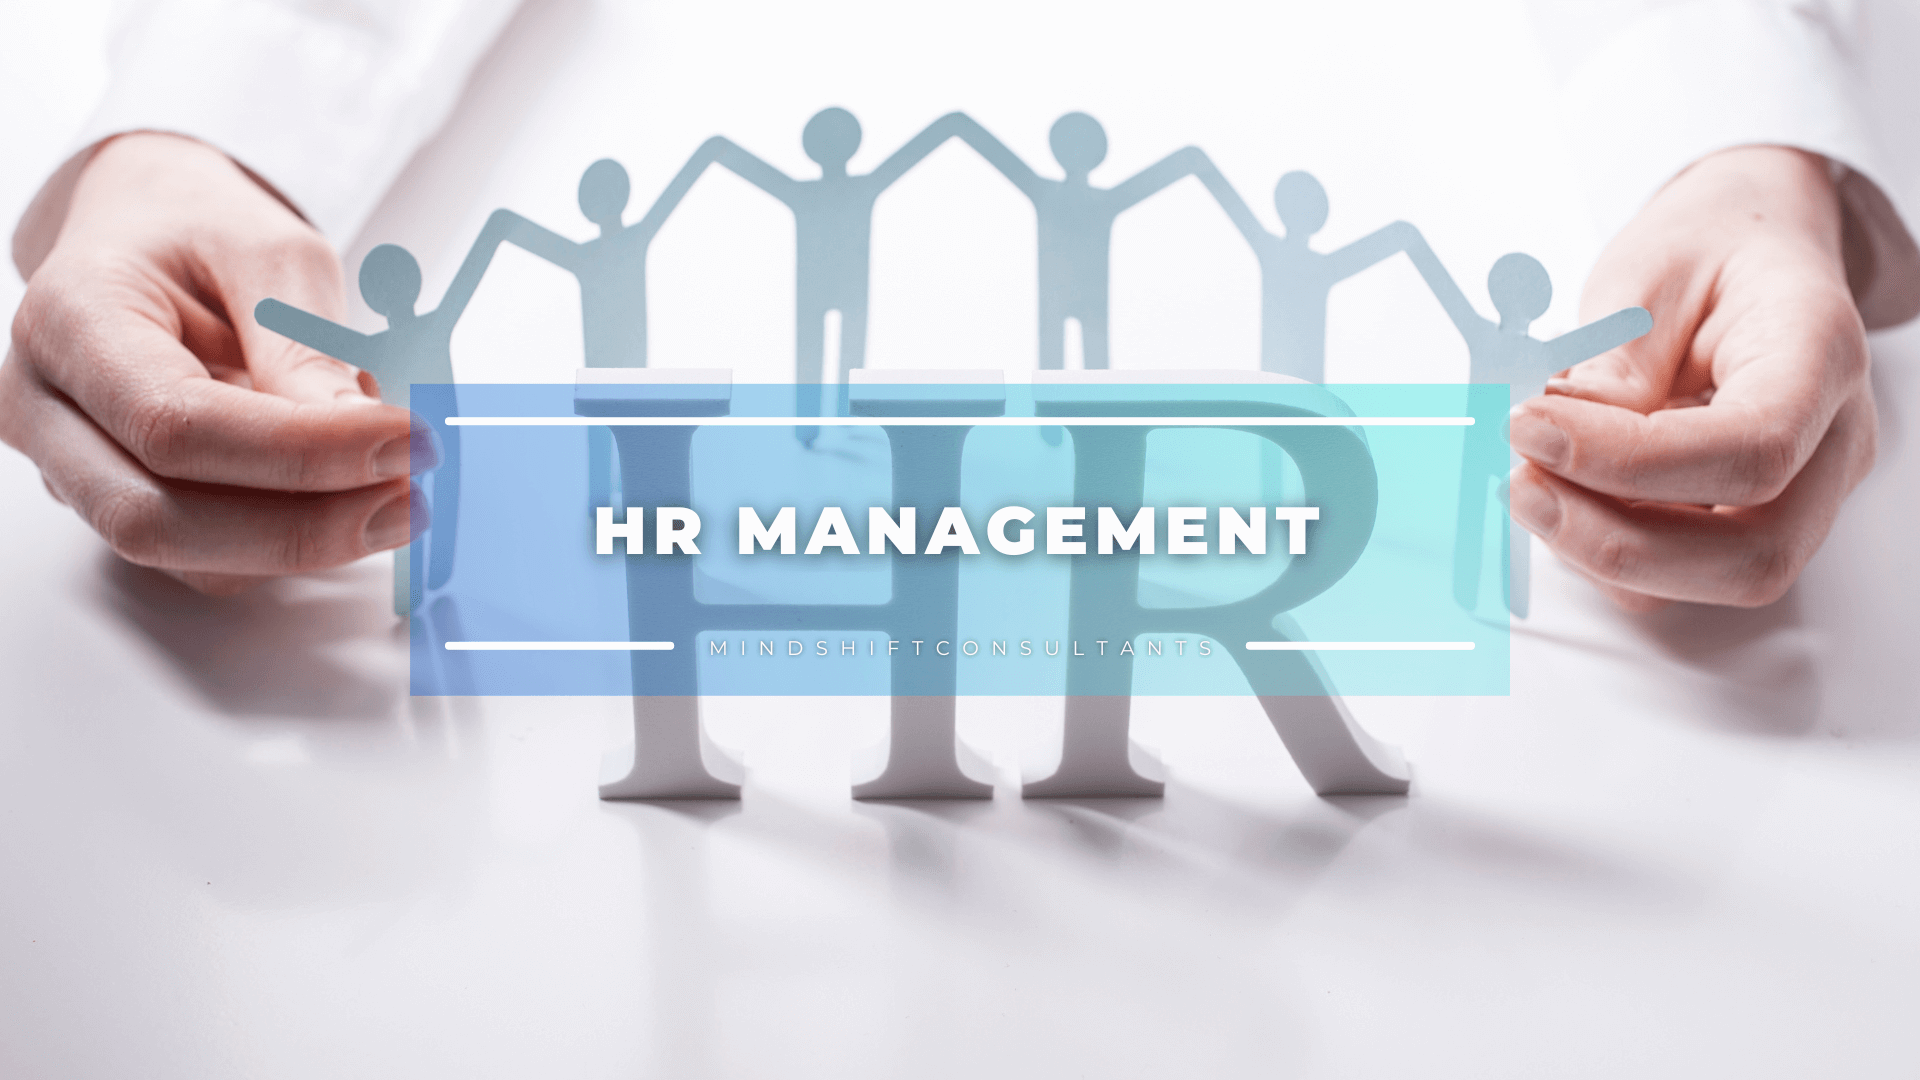 ILM Recognized - Human Resources Management: KPI and Strategies